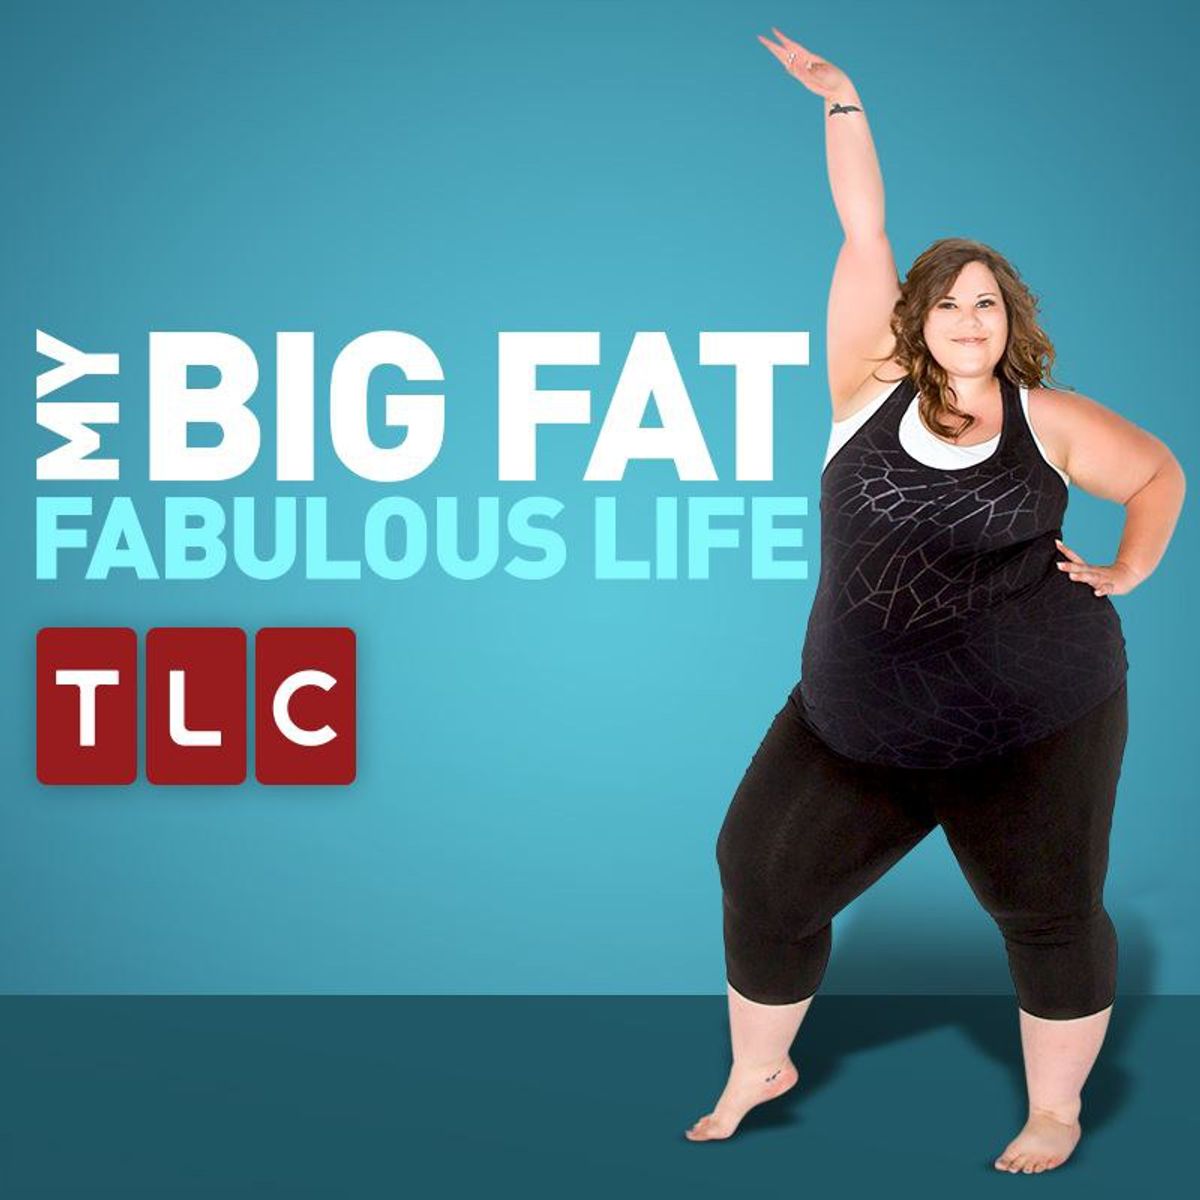 Why I Hate The TLC Show 'My Big Fat Fabulous Life'